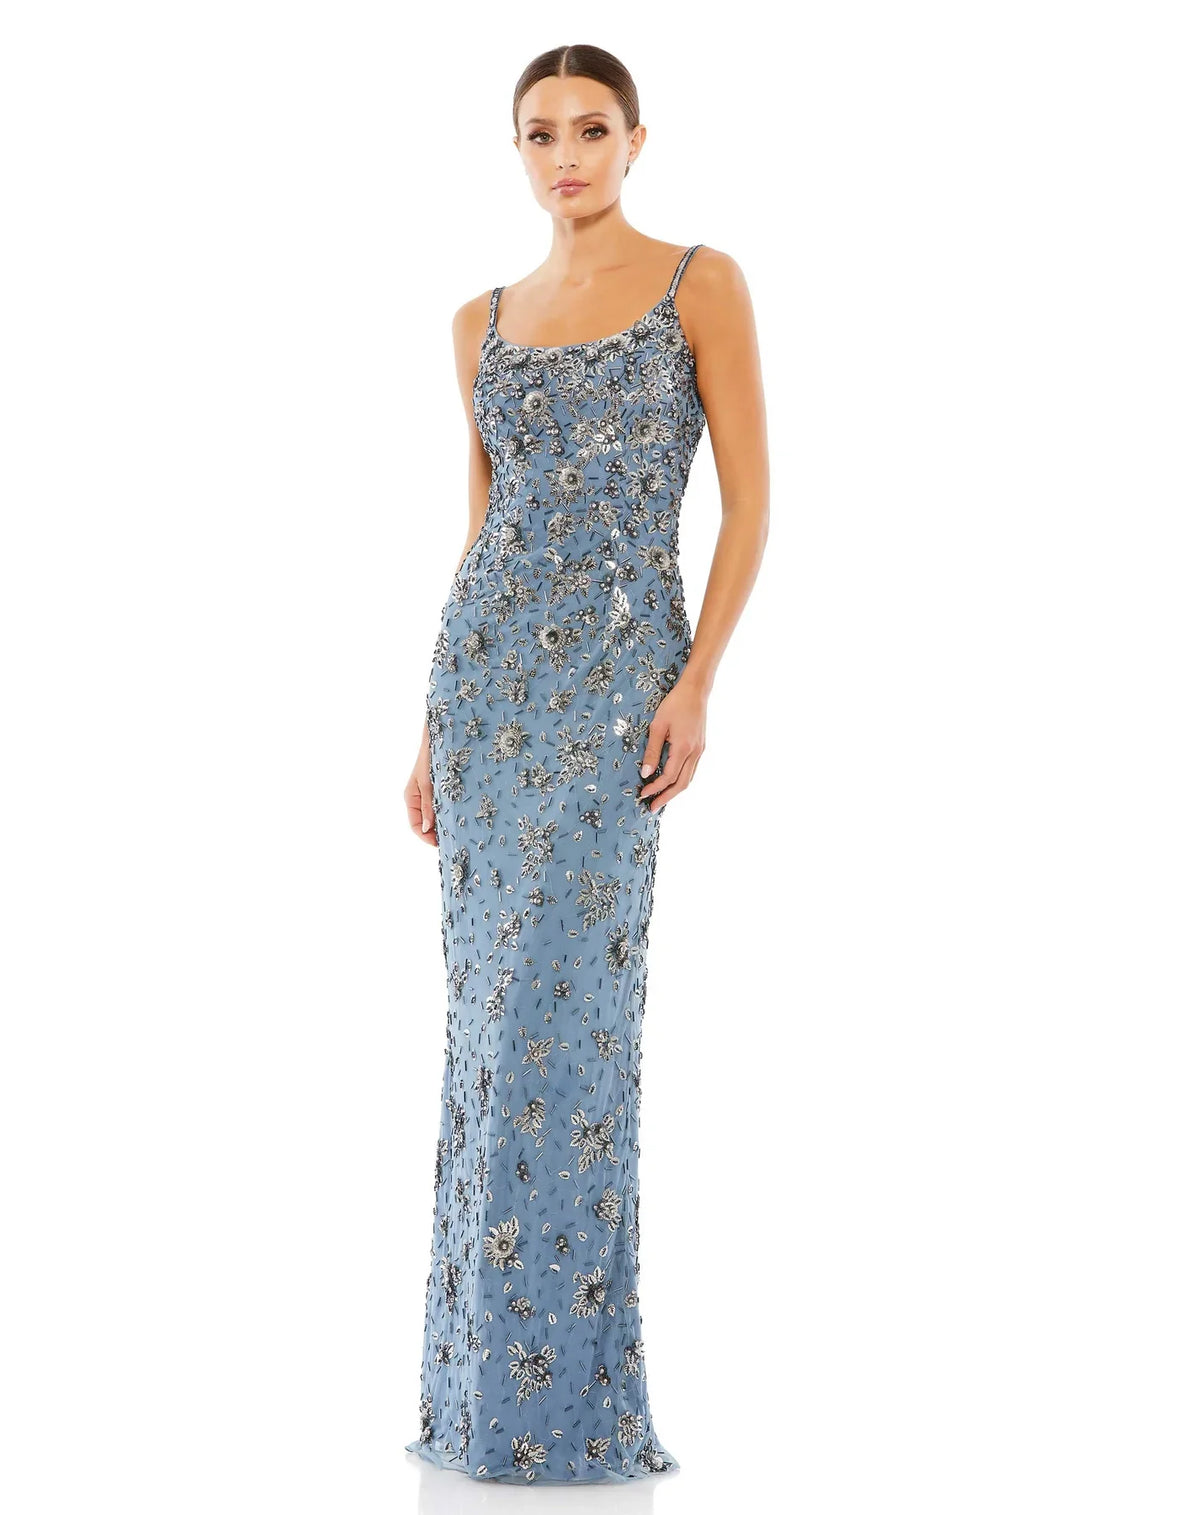 Mac Duggal Style #5477 Floral embellished scoop neck evening gown - Slate grey